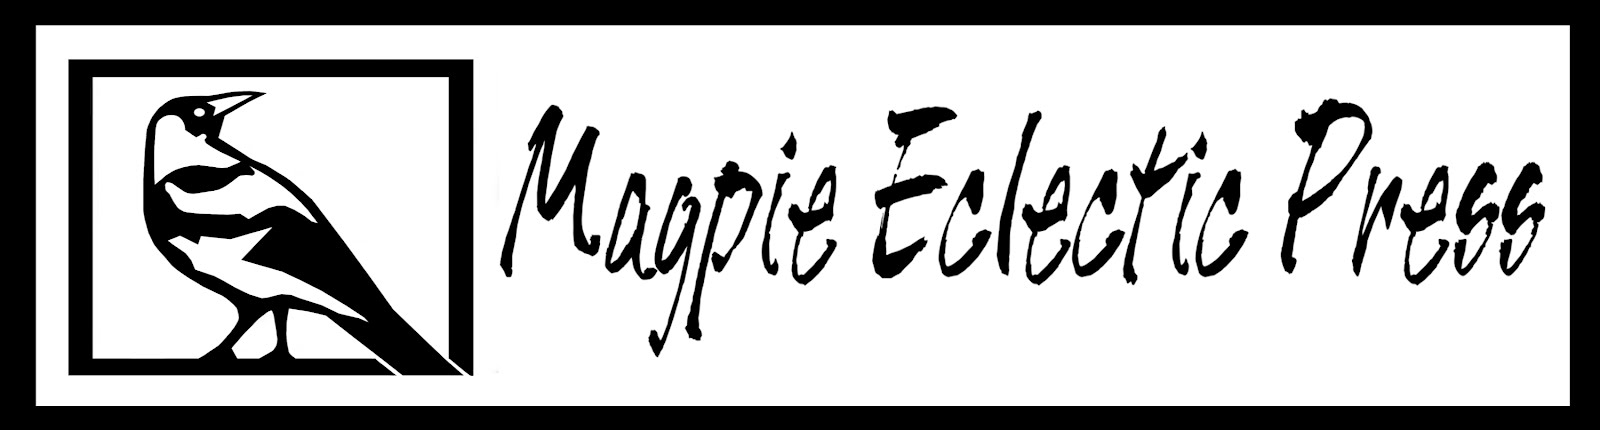 Magpie Eclectic Press